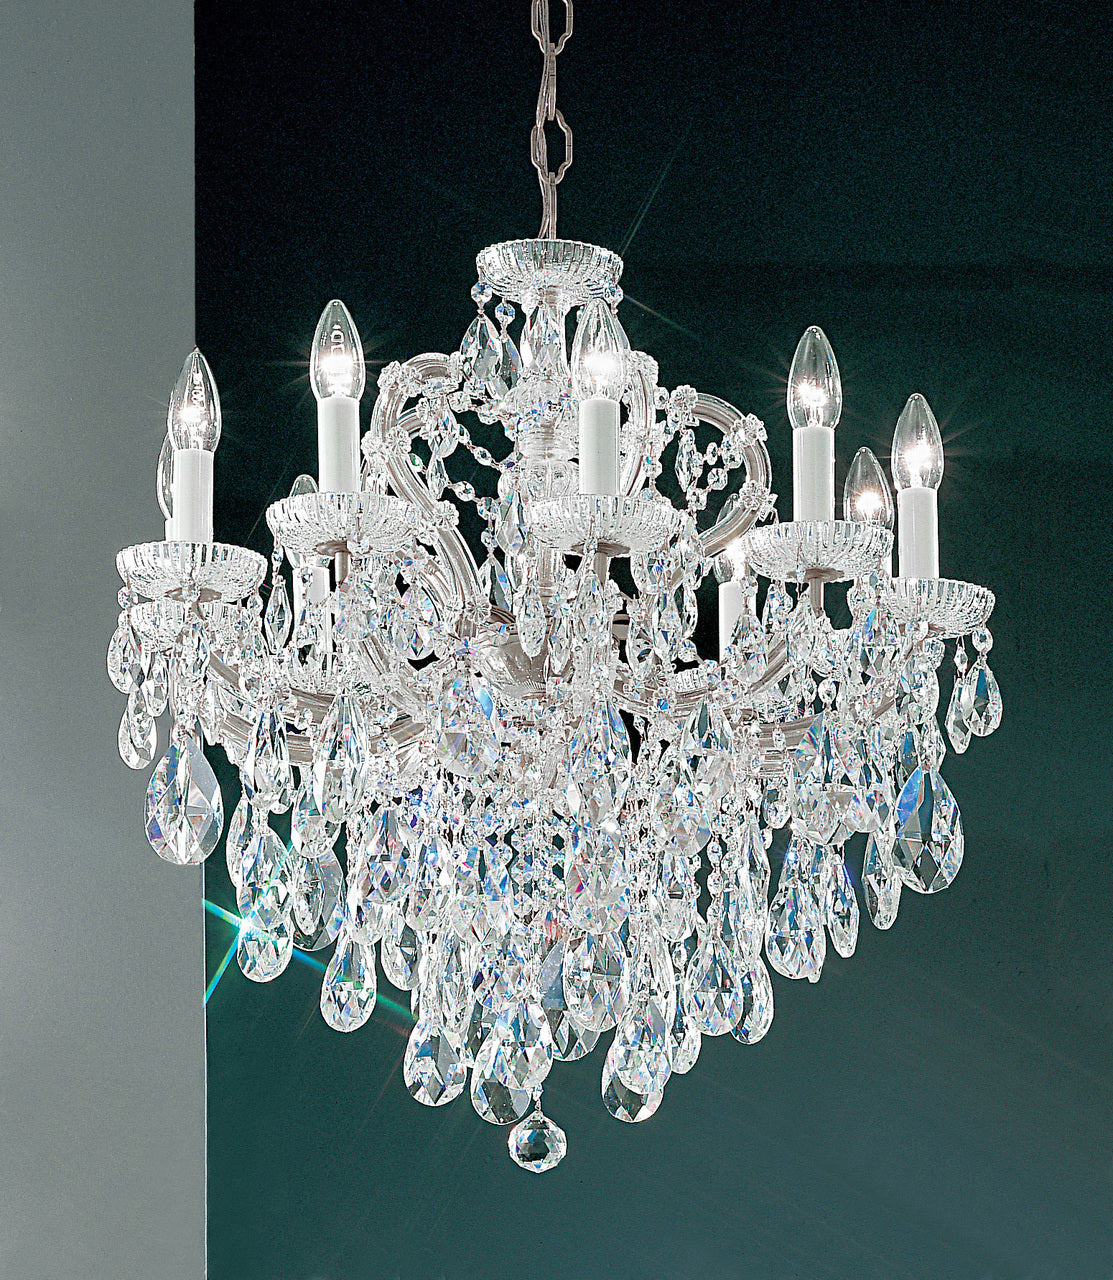 Classic Lighting 8120 CH C Maria Theresa Traditional Crystal Chandelier in Chrome (Imported from Italy)